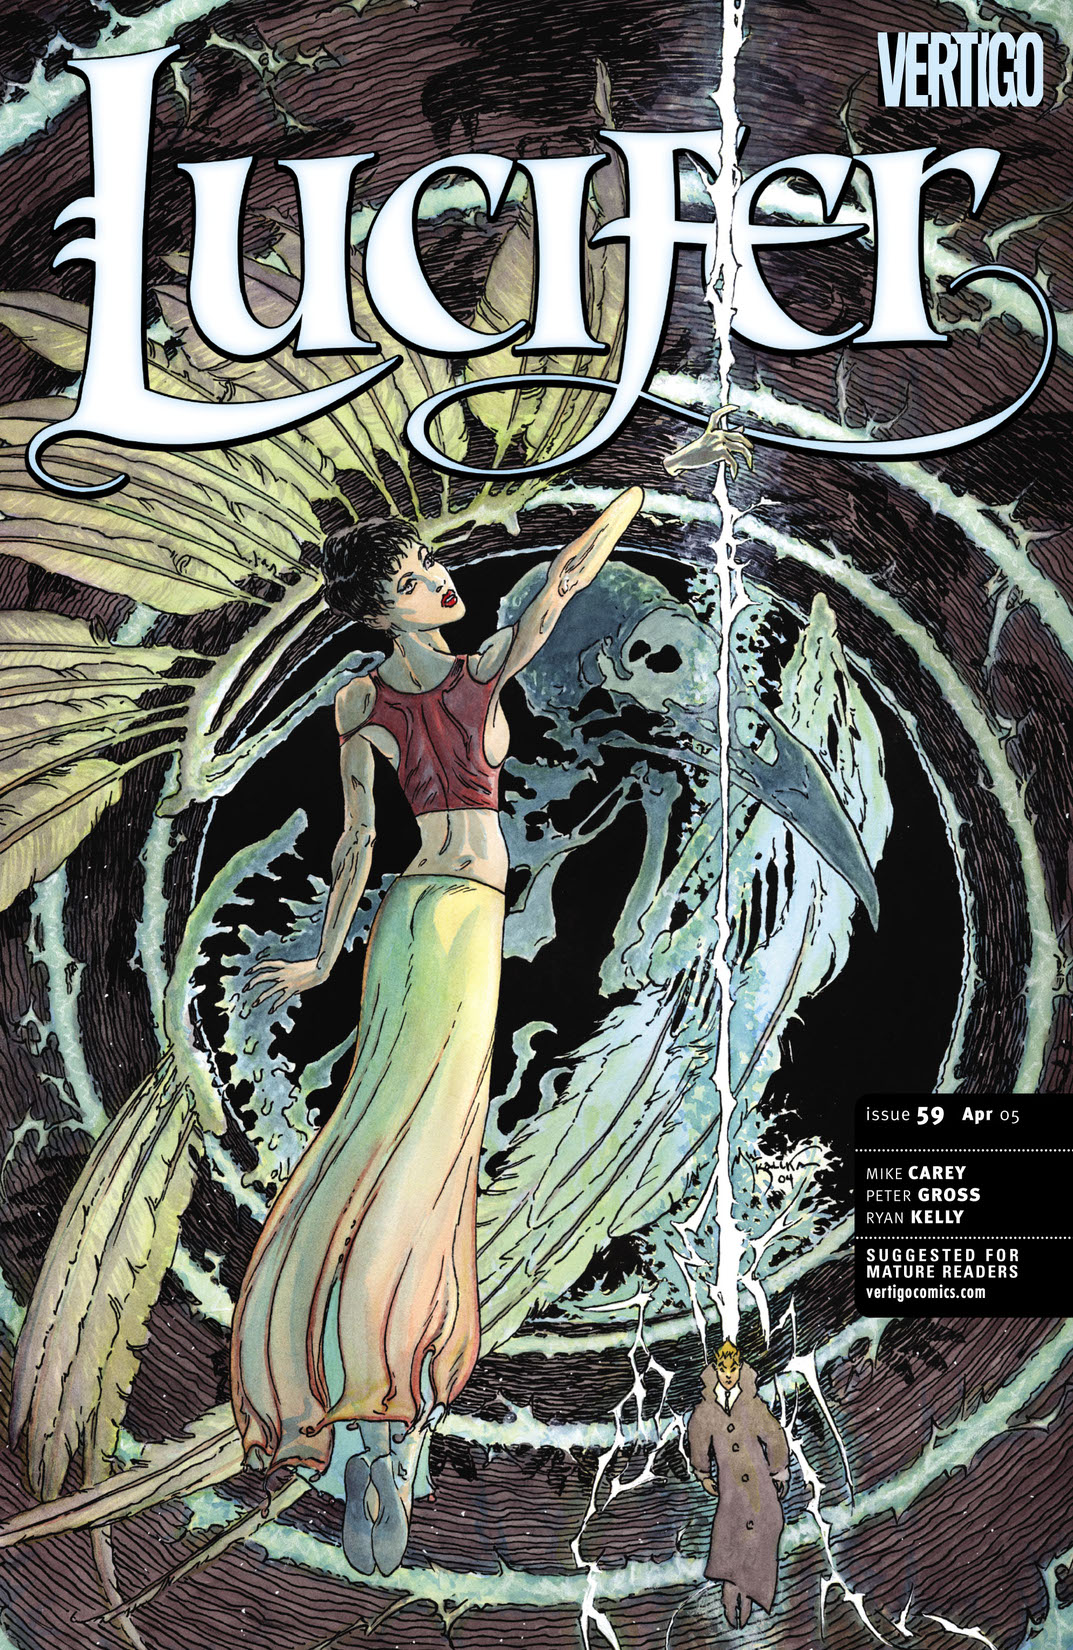 Lucifer #59 preview images